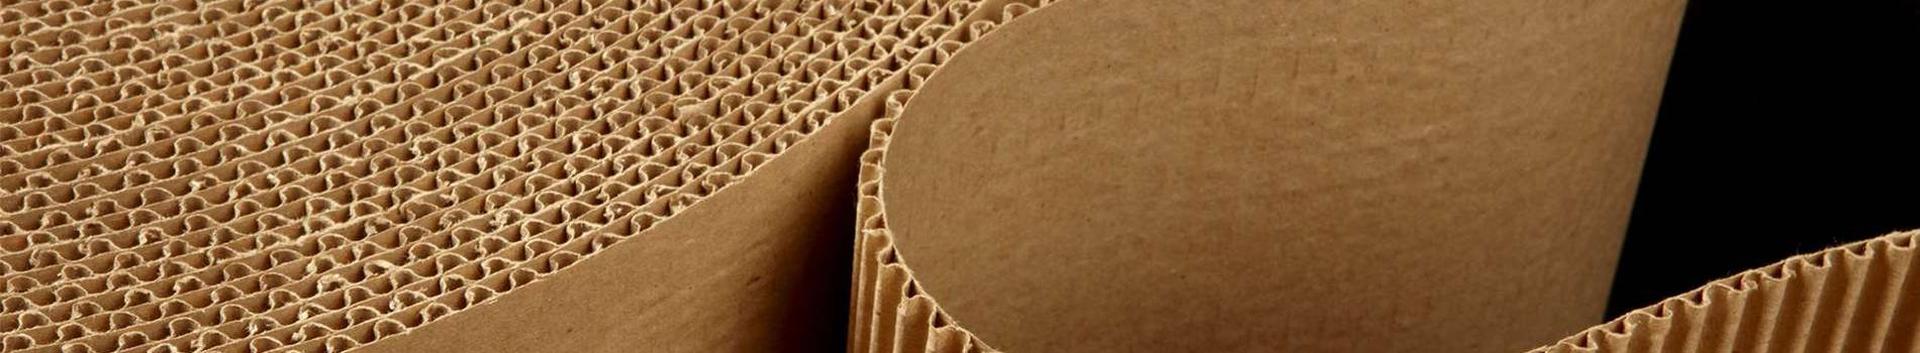 manufacture of paper, Paper Industry, cellulose industry, Wood and Paper Industry, Paper goods